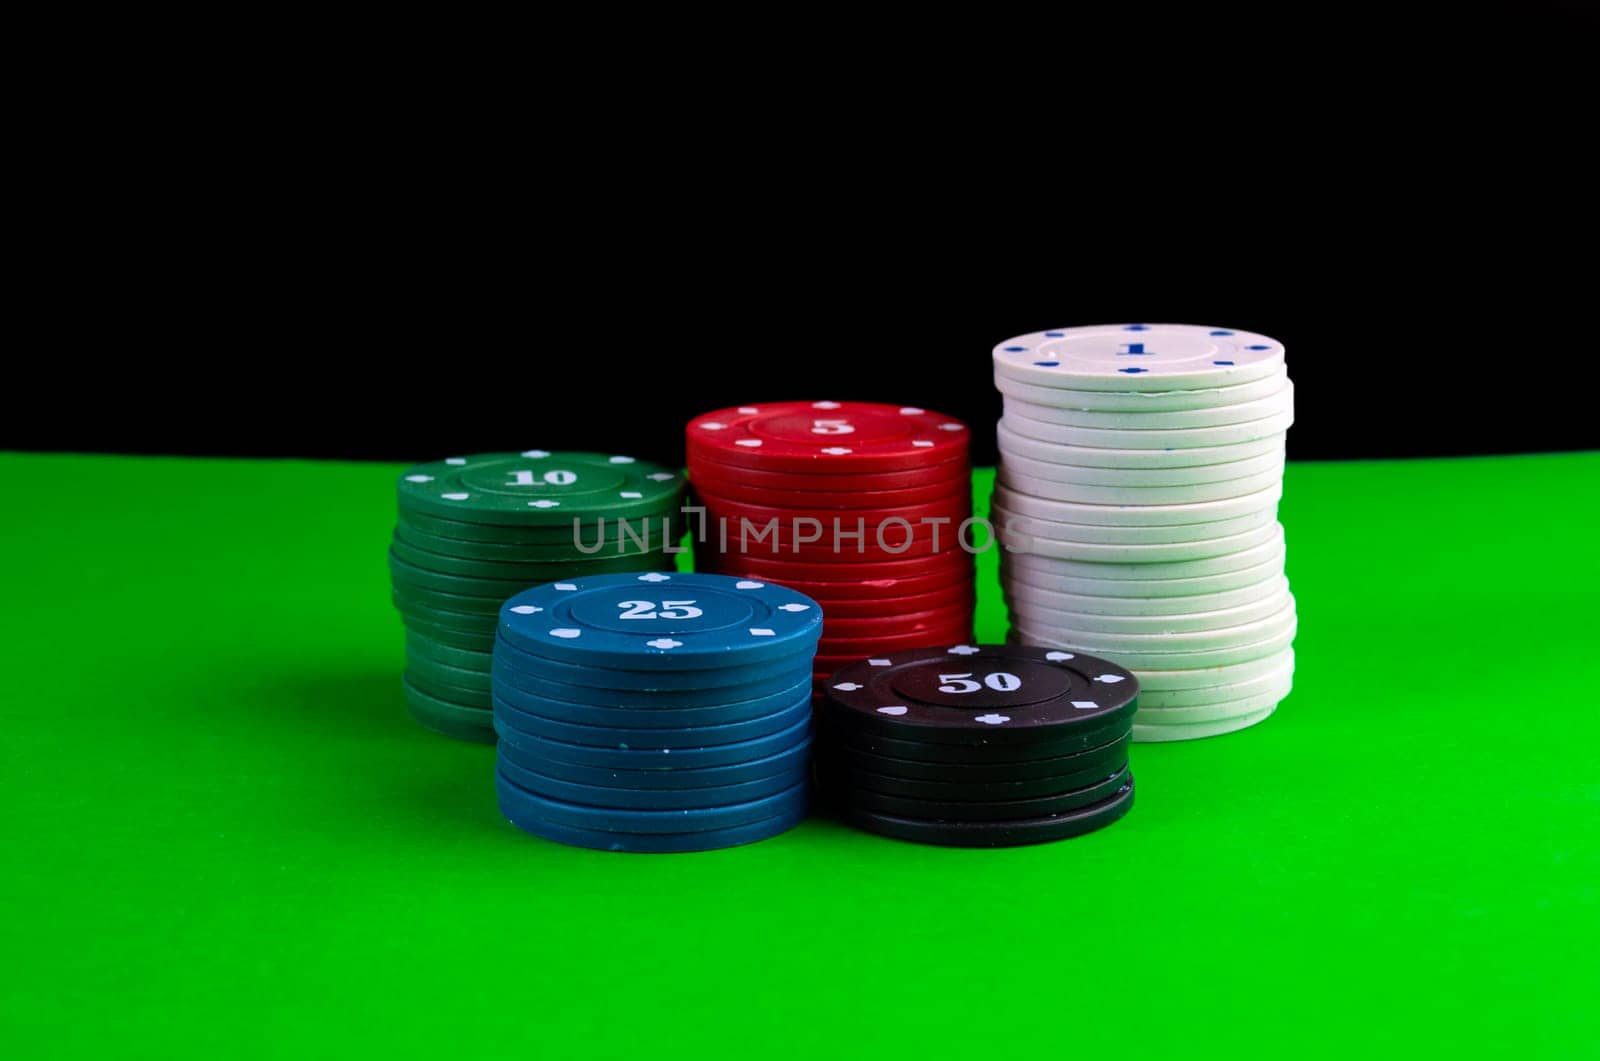 Poker game, stacks of chips on a poker table on a black background. Stacks of chips on a green poker table on a black background.